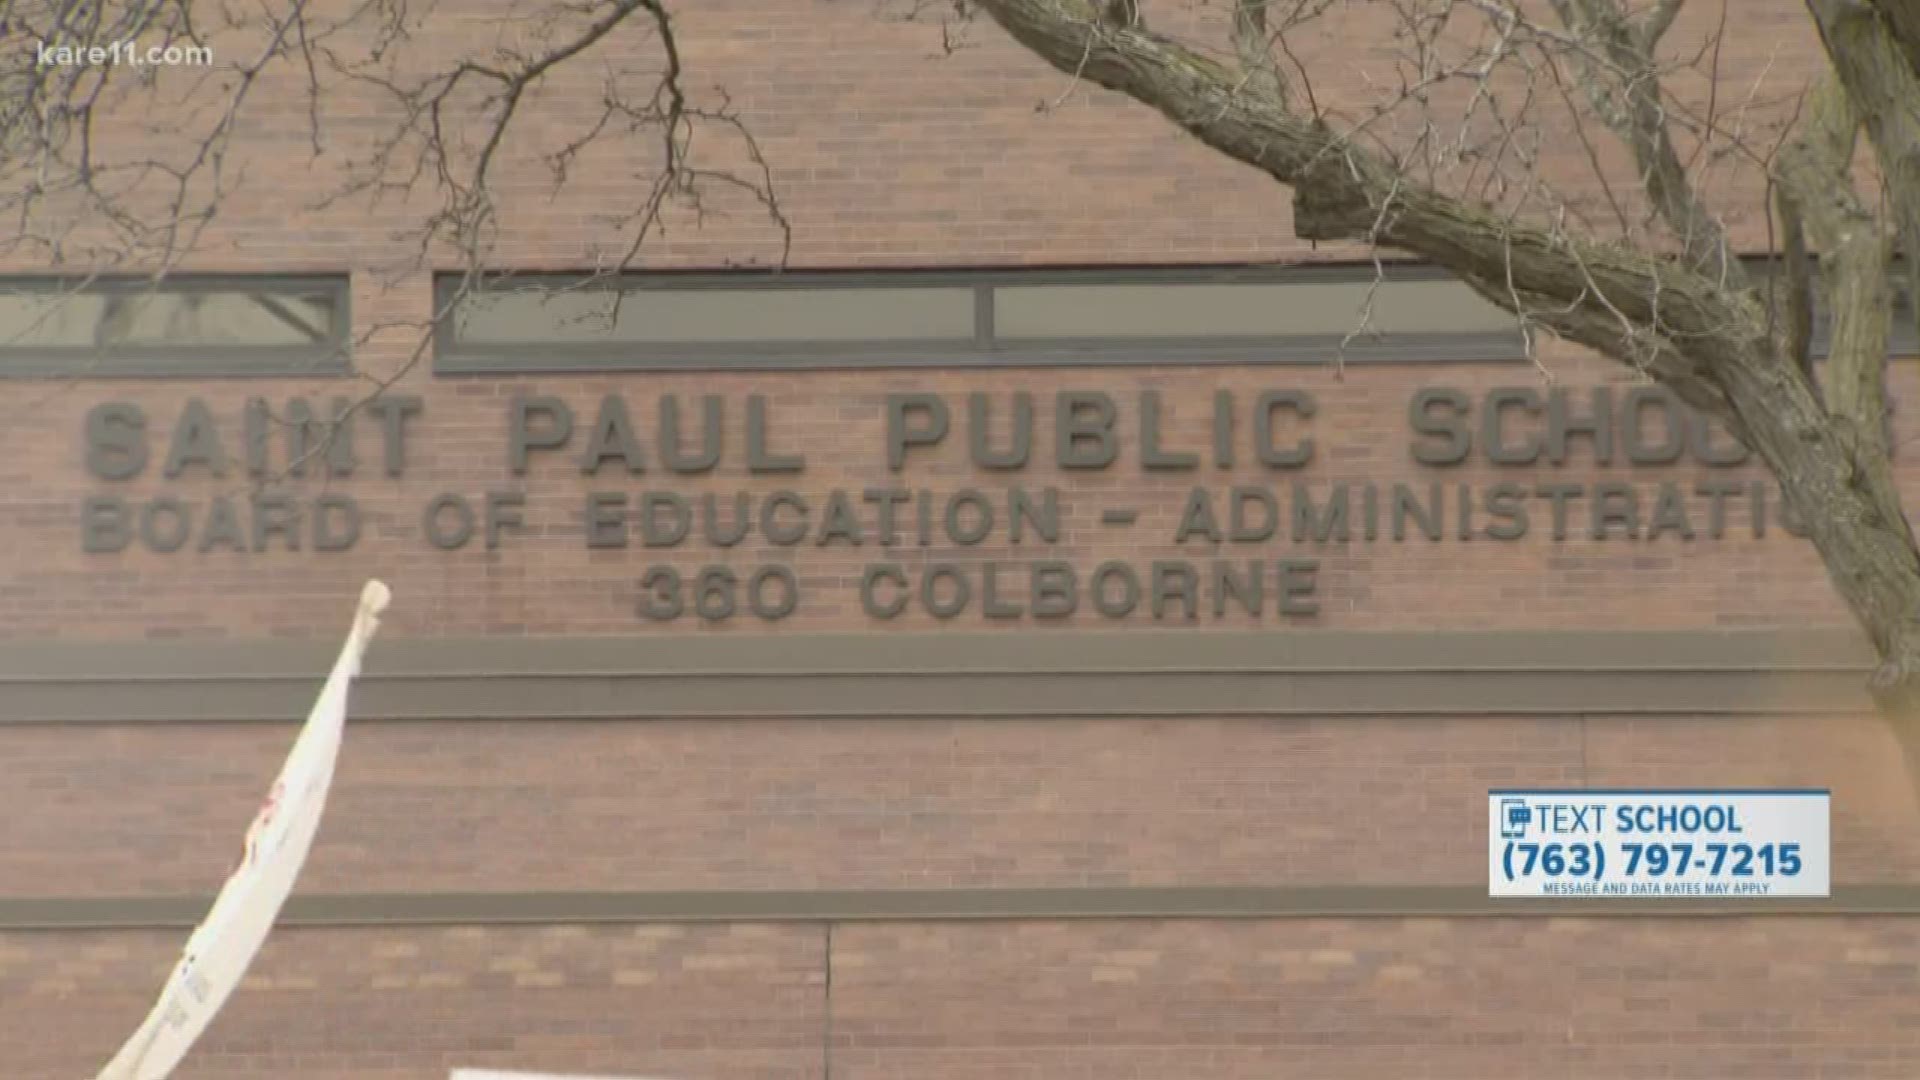 St. Paul Public Schools spokesperson Kevin Burns says the school system cannot provide educational services to students while striking continues.